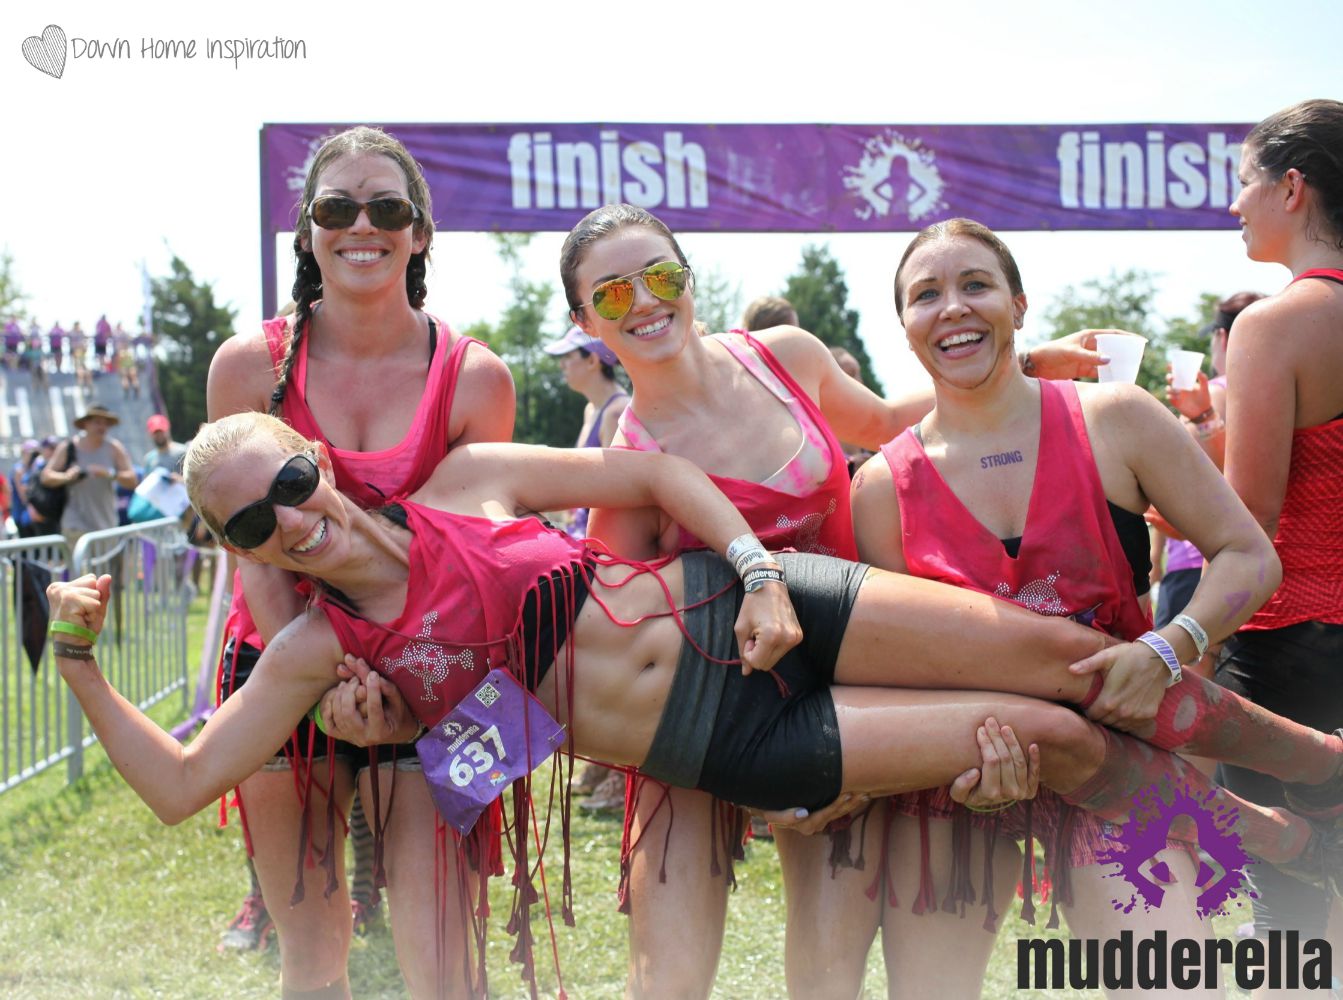 How I Owned my Strong Mudderella Run Recap Down Home Inspiration